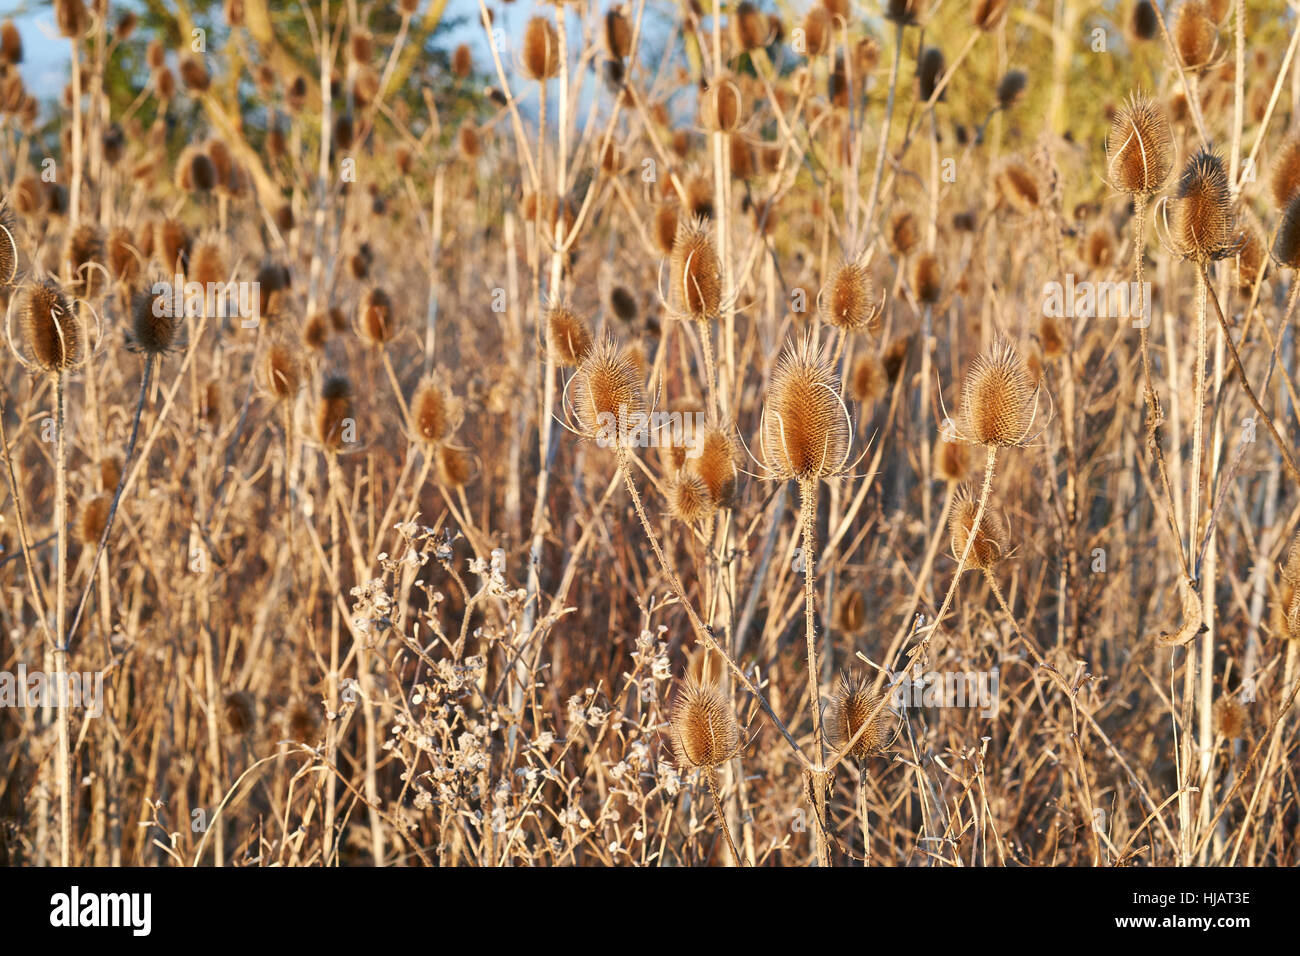 Teasel (Dipsacus fullonum) plants during winter dieback displaying dead conical flower heads and dried out stems. England, UK. Stock Photo